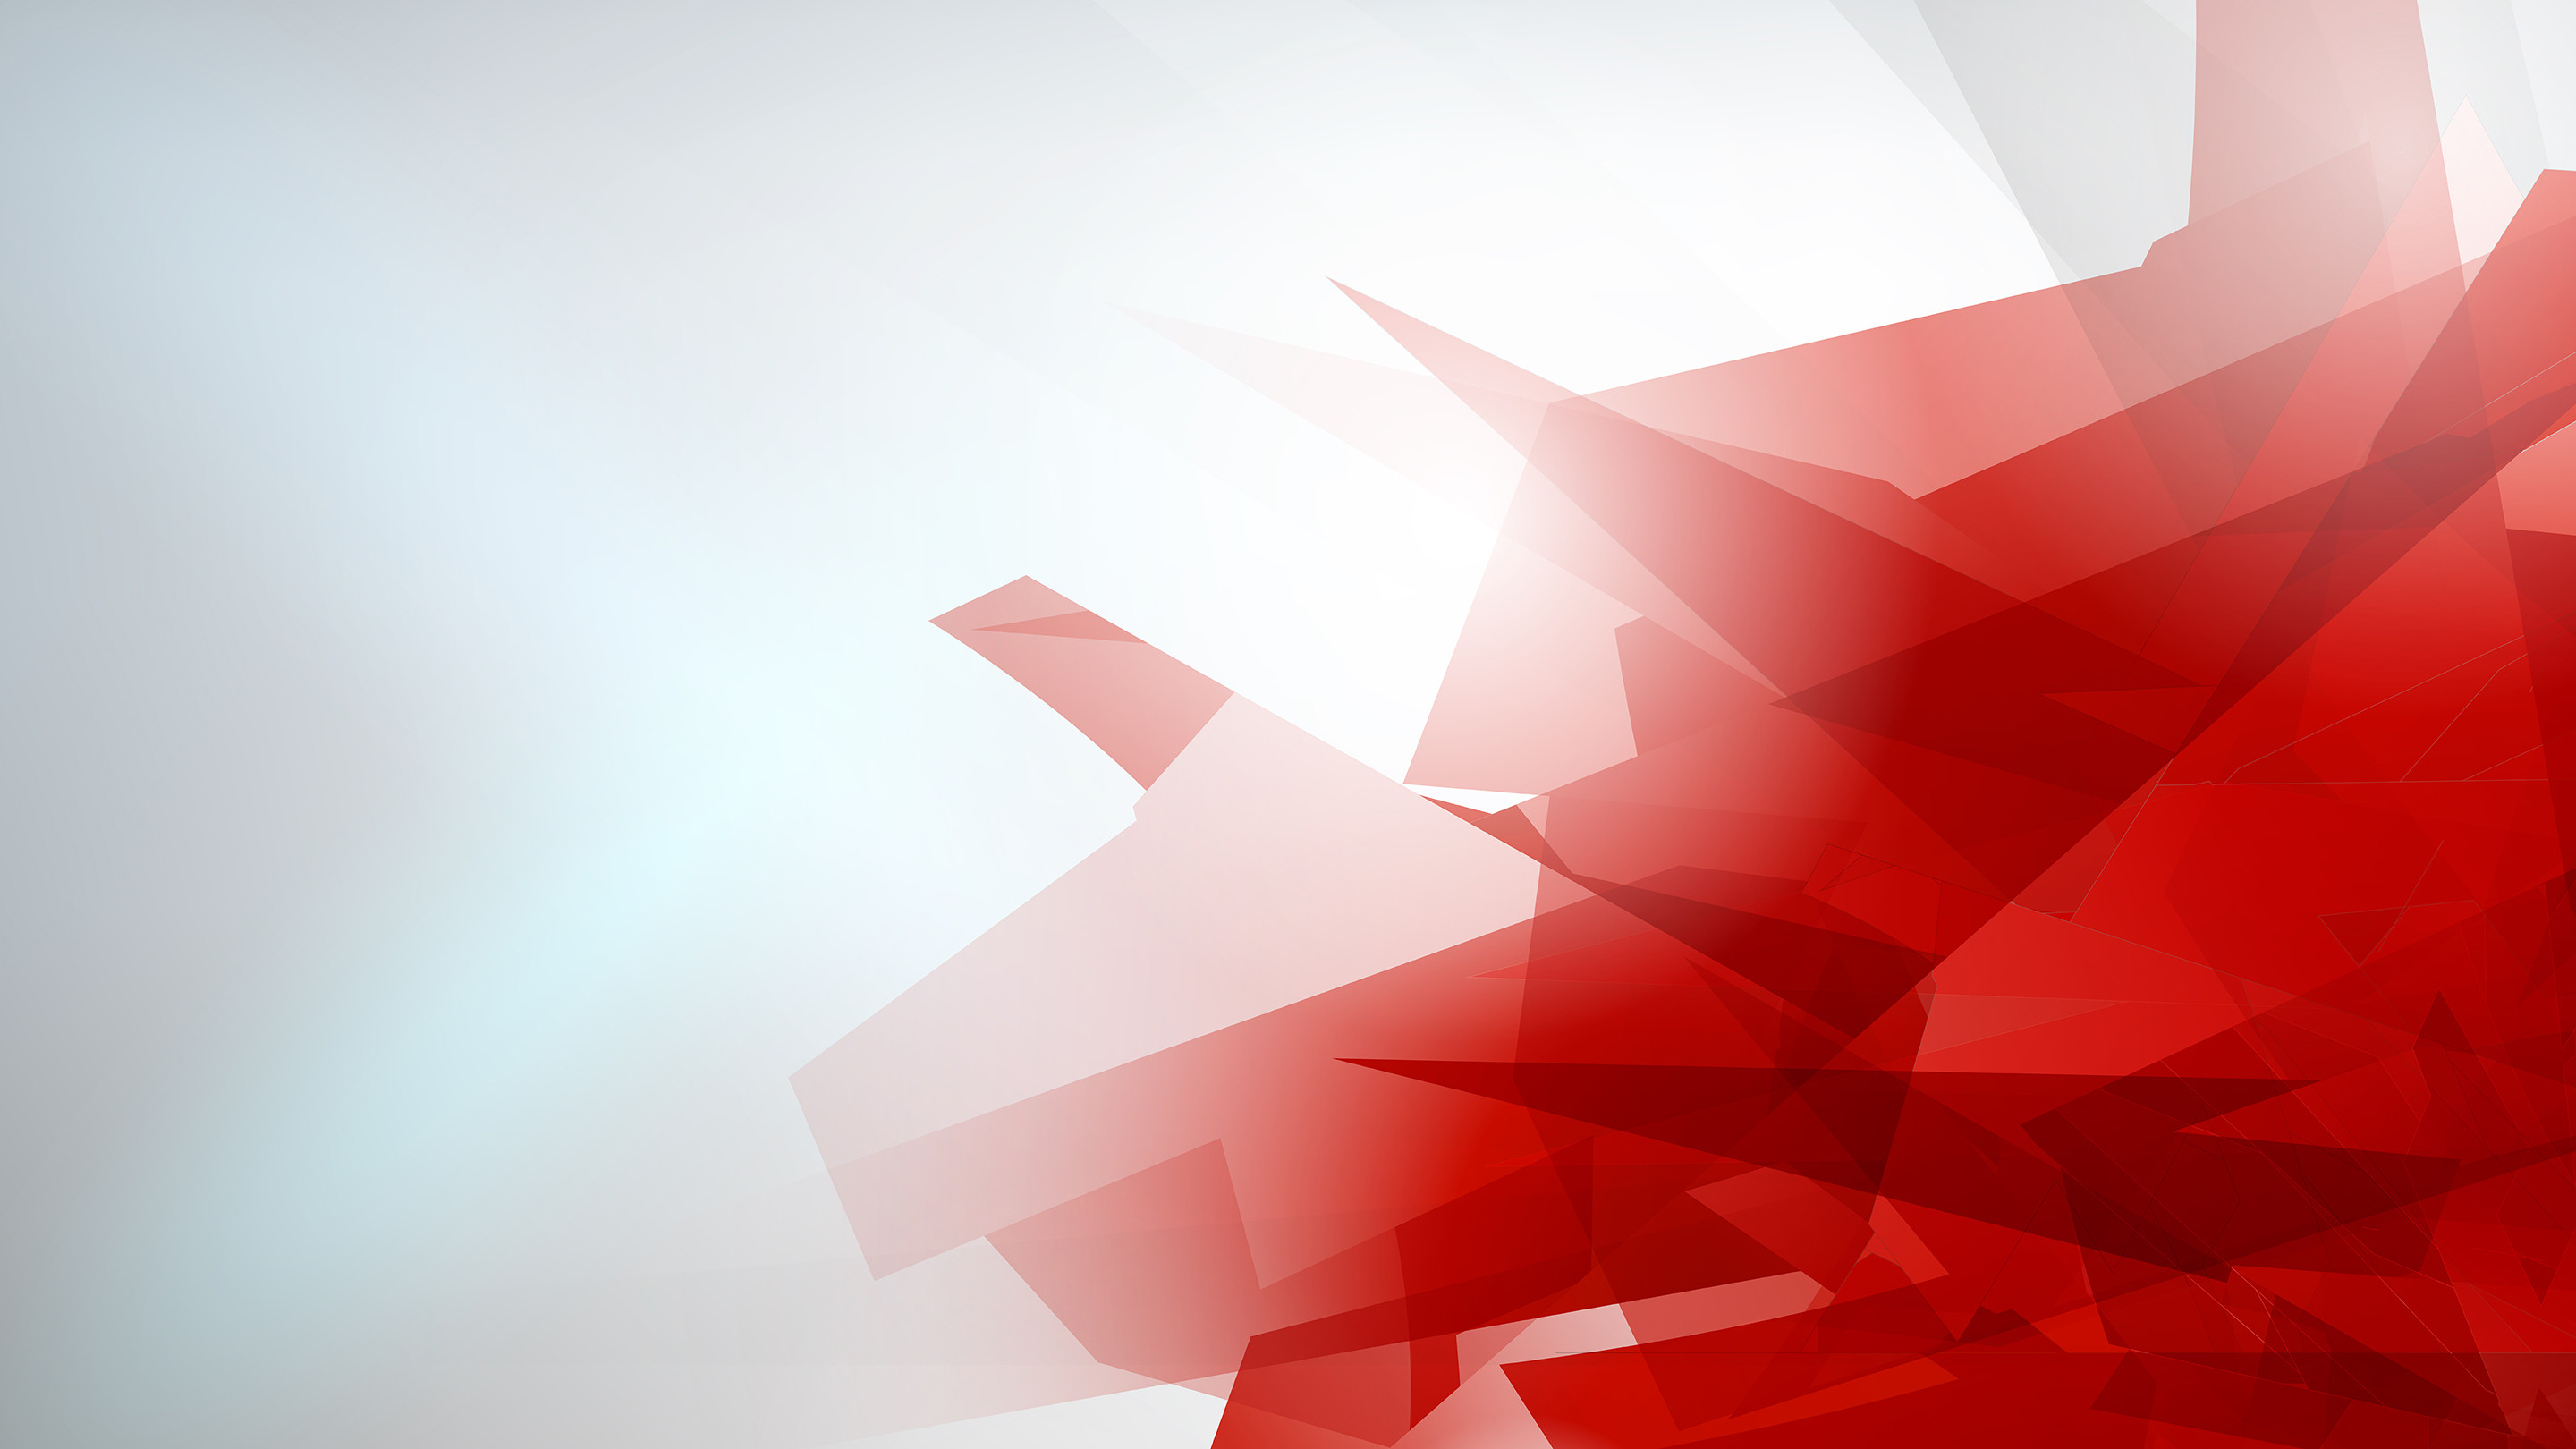 Thinkpad Wallpaper Hd - Abstract Red And White - 2880x1620 Wallpaper -  